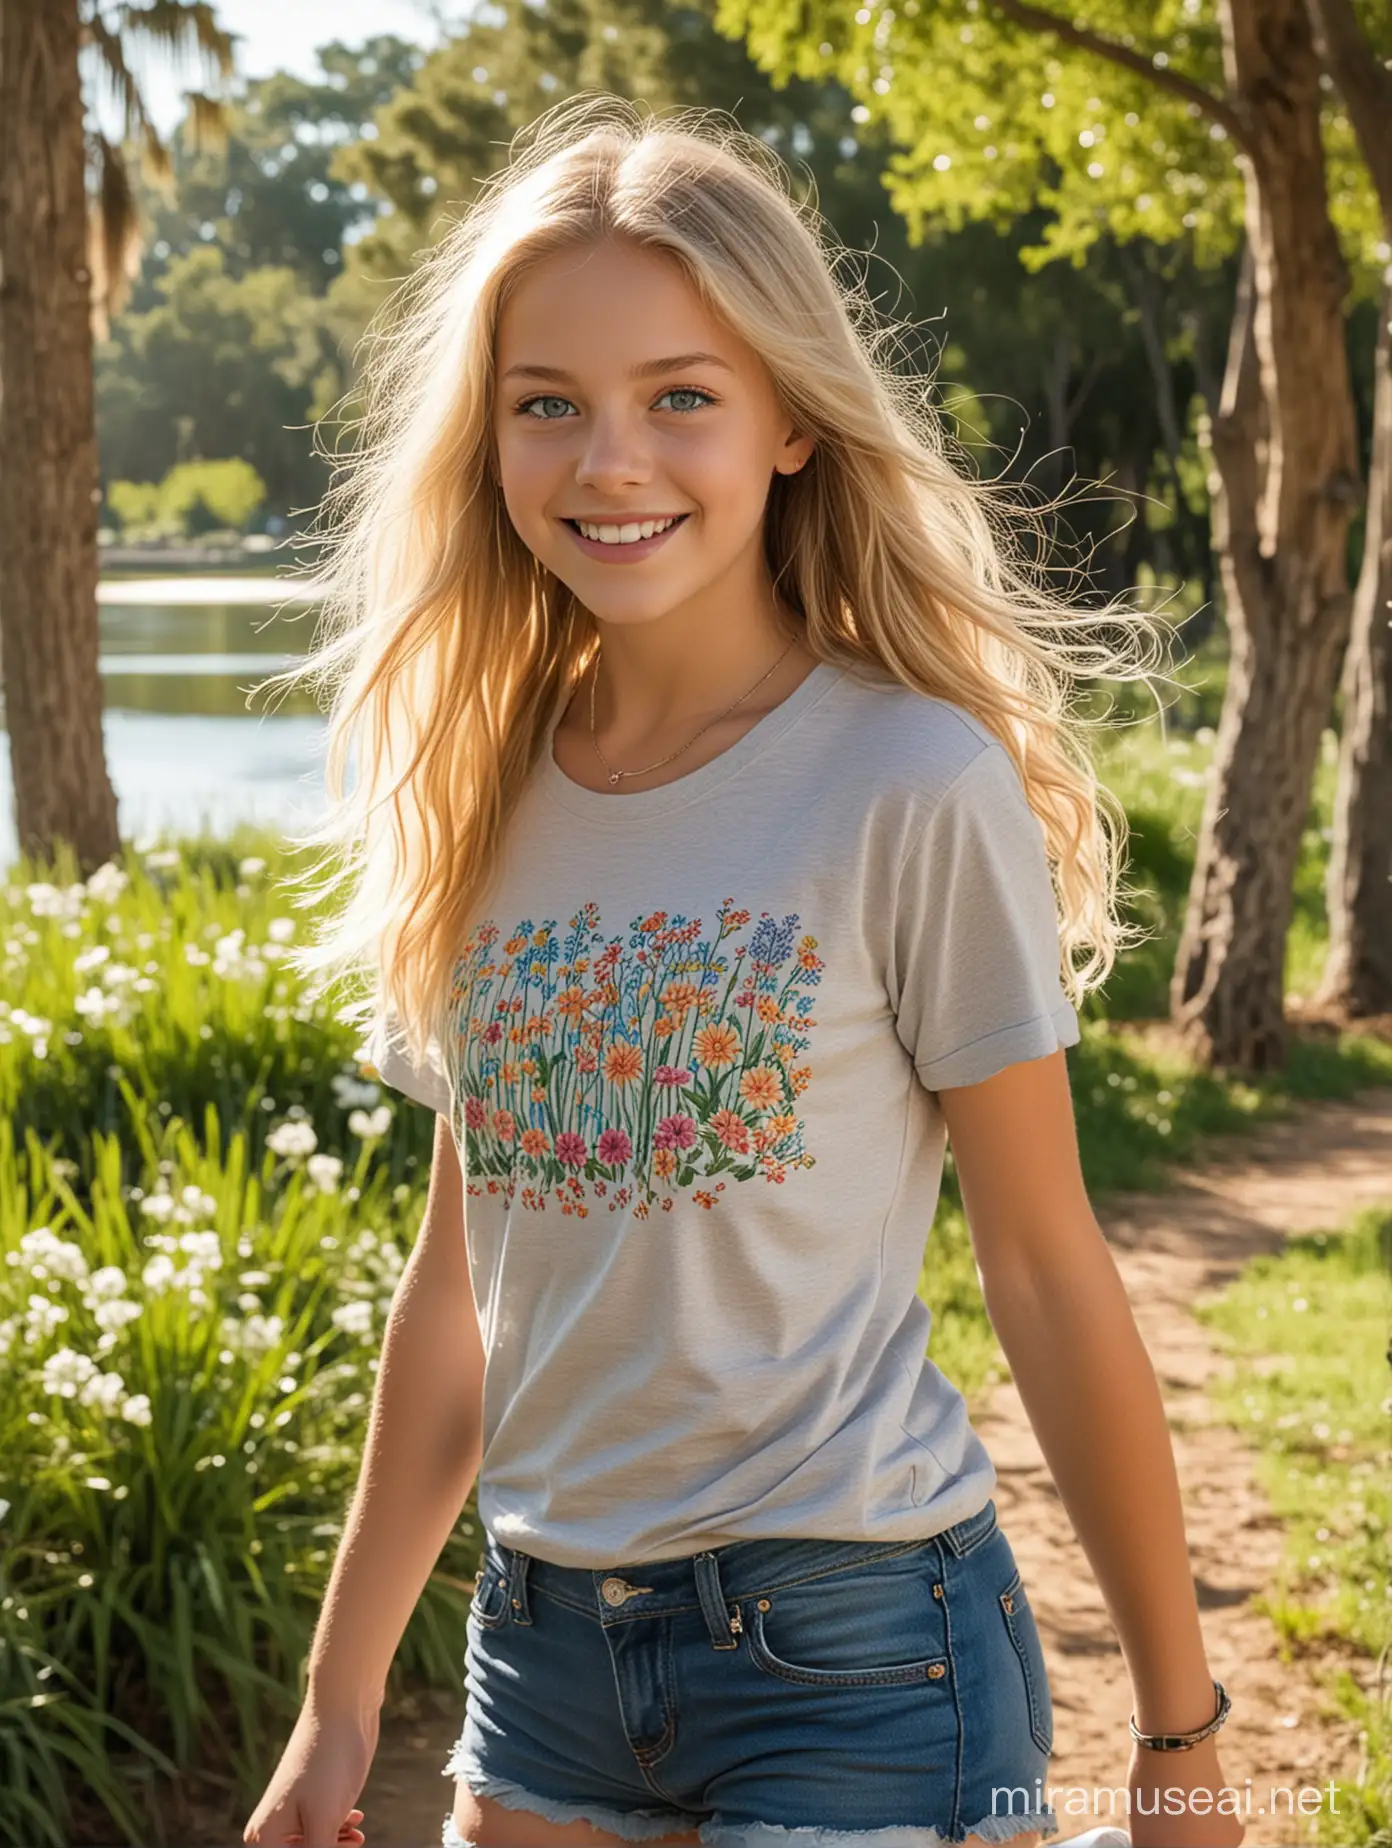 13 year old cute sweet adorable long straight wavy blonde hair blue eyes half T-shirt and tight jean shorts running in a beautiful park with grass trees and flowers and a lake full body full view giggling light makeup and jewelry sunny beautiful day 